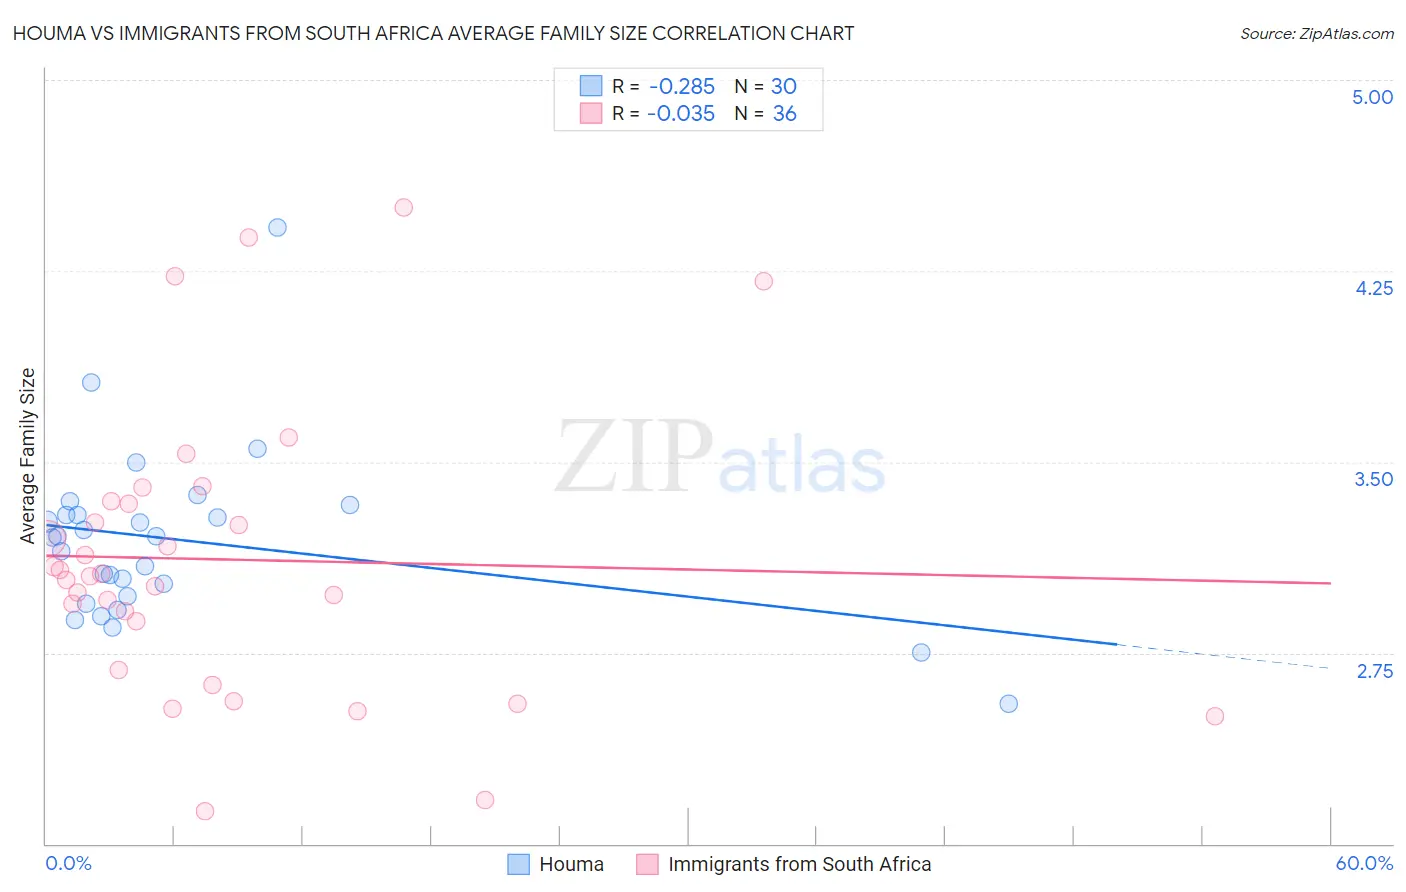 Houma vs Immigrants from South Africa Average Family Size